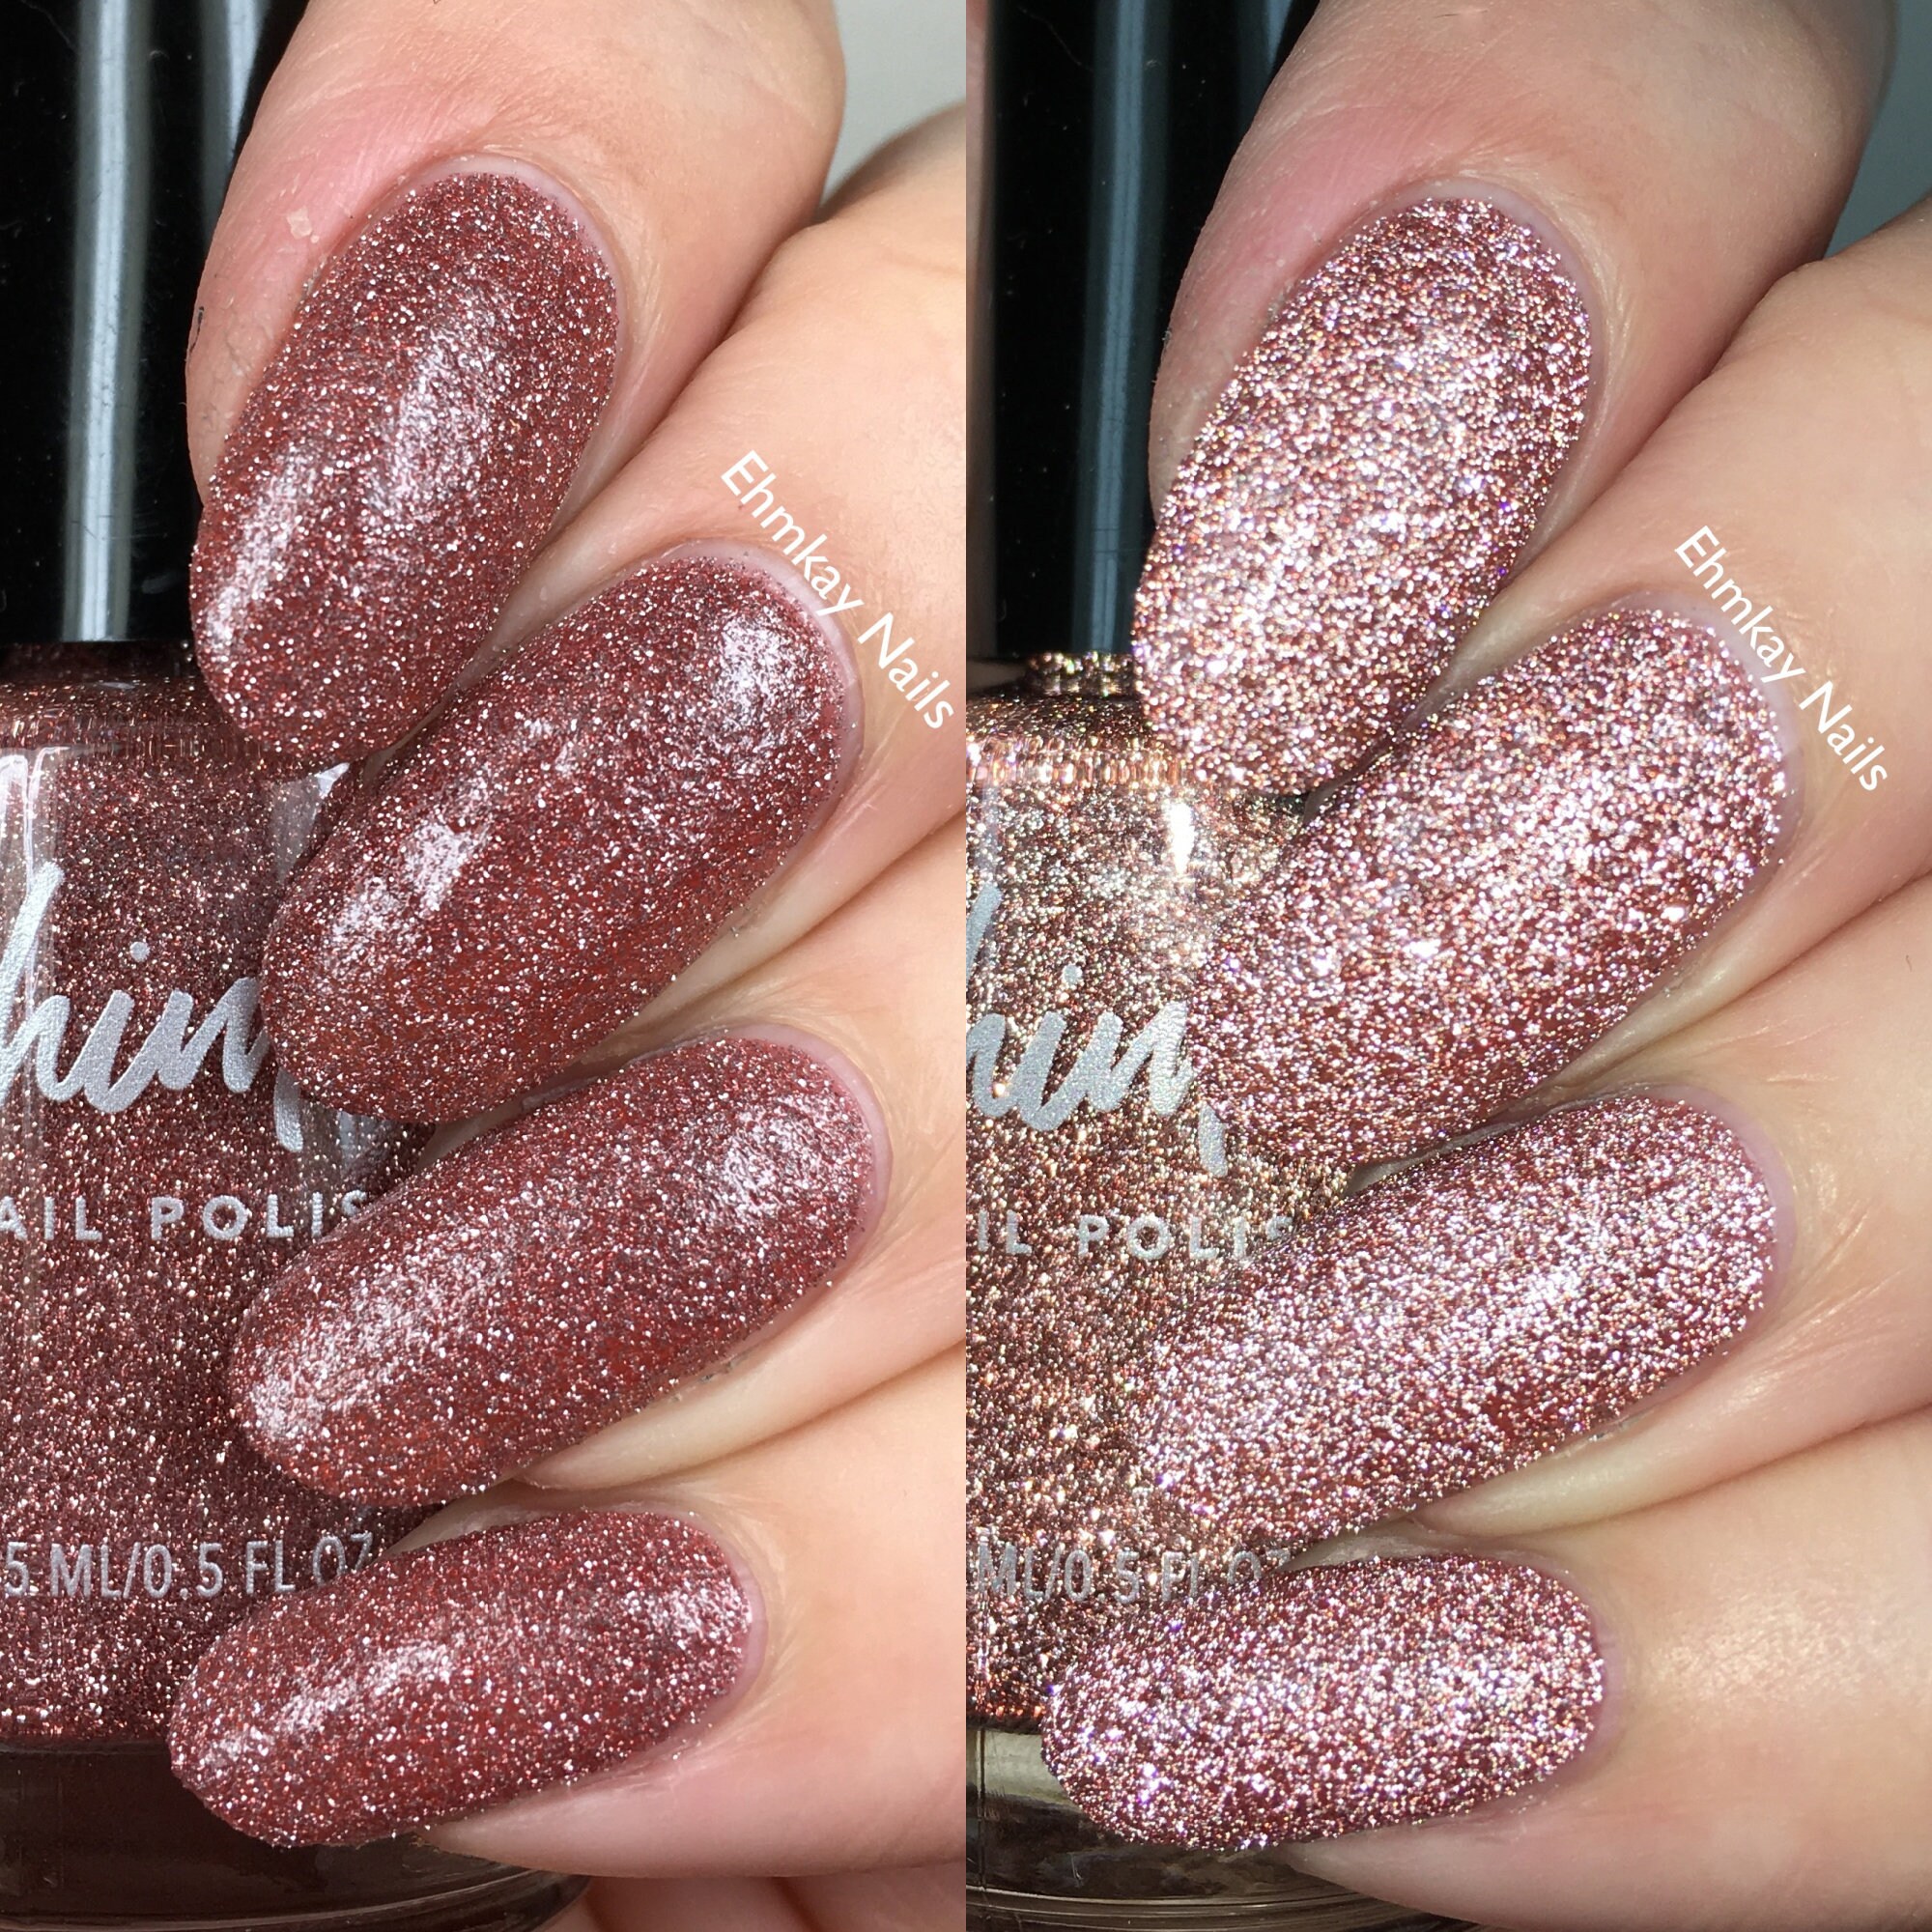 ehmkay nails: Pink Gradient with Gold Foil